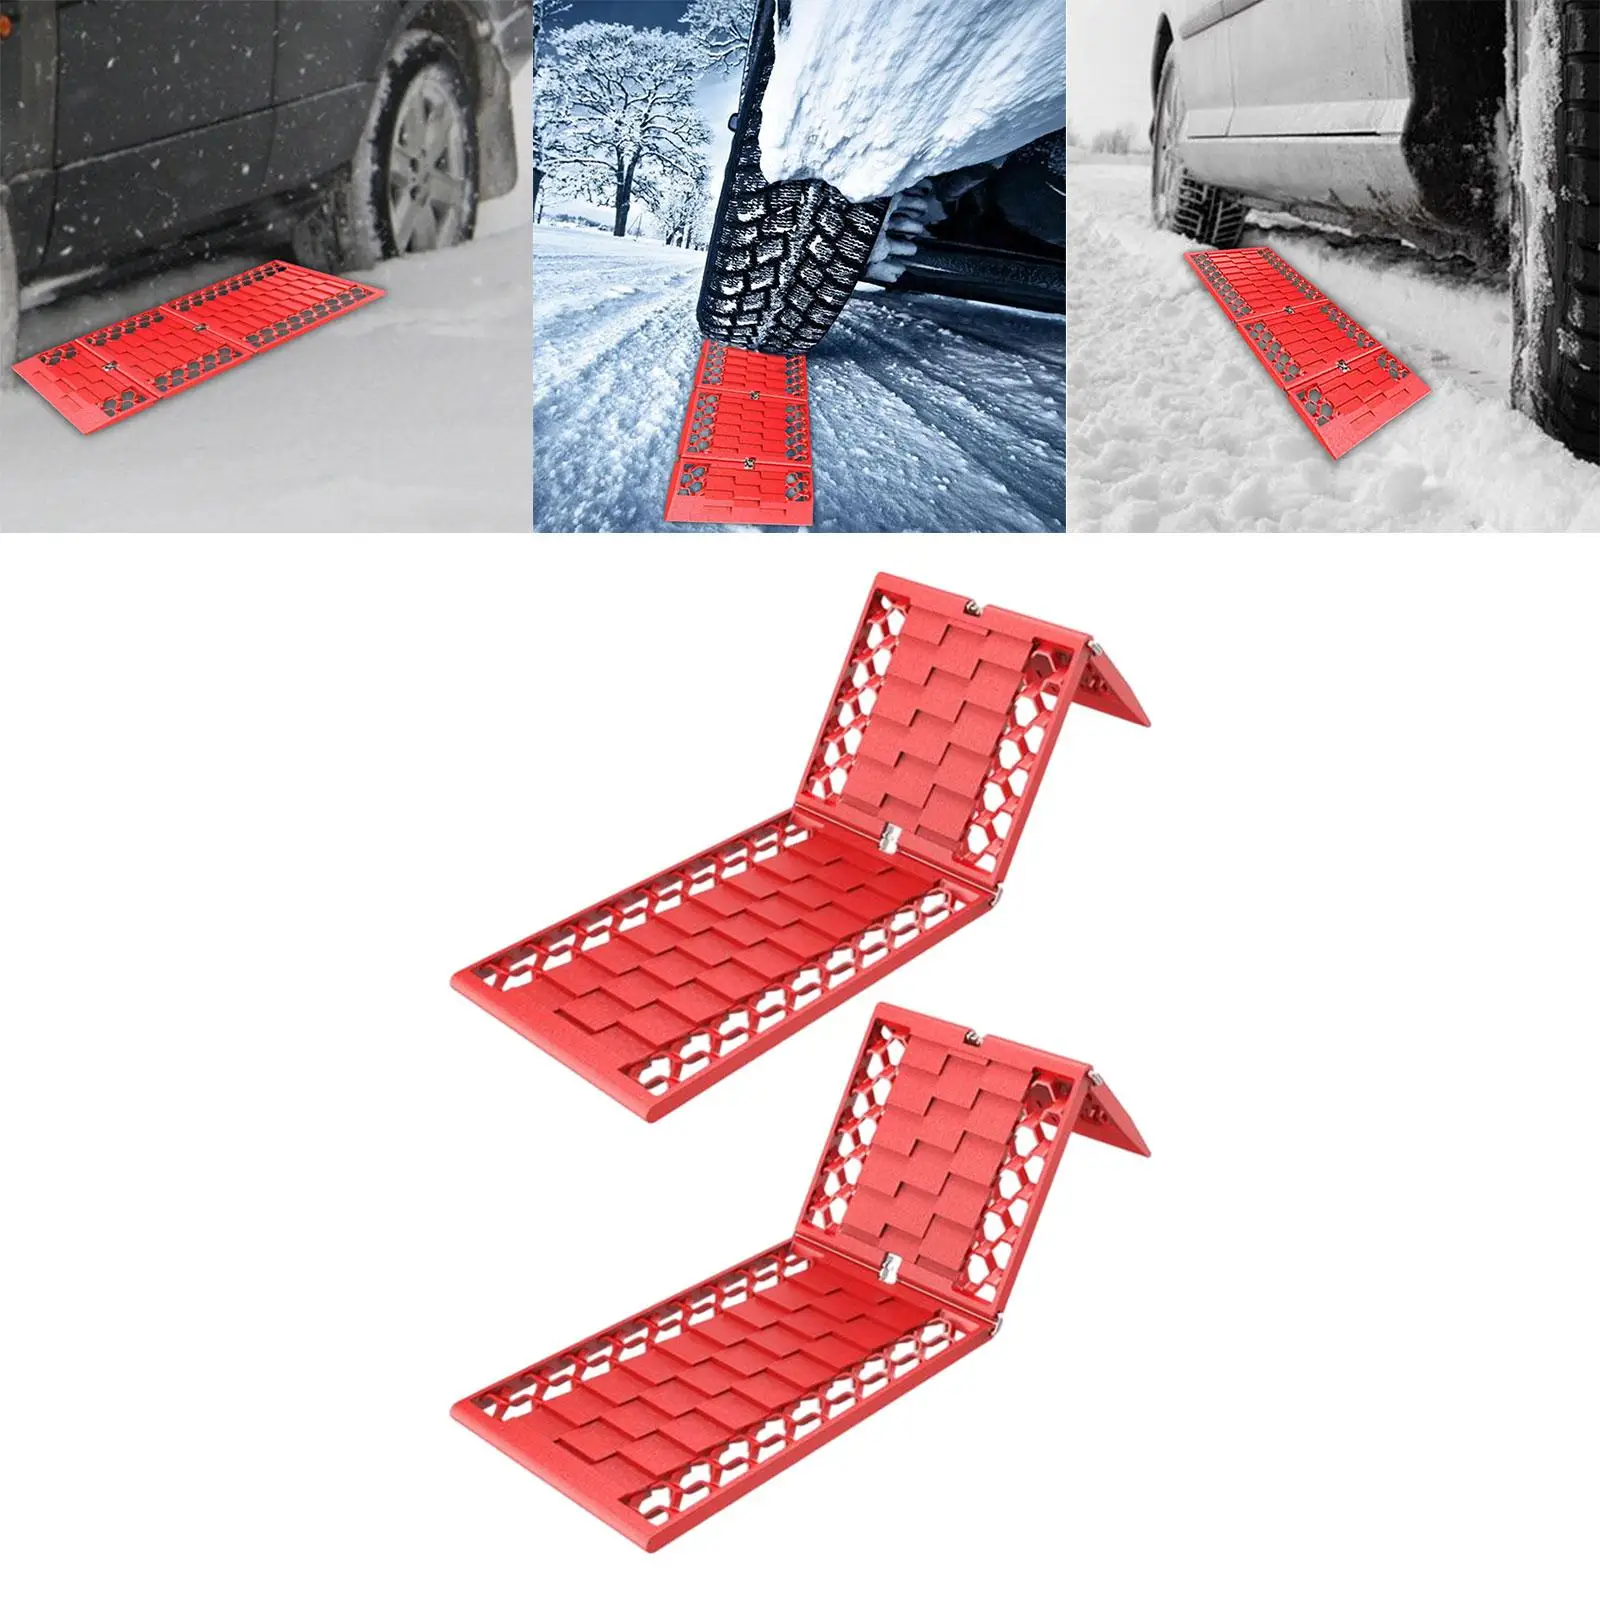 2Pcs Portable off roading traction track Heavy Duty for Suvs Cars Camping